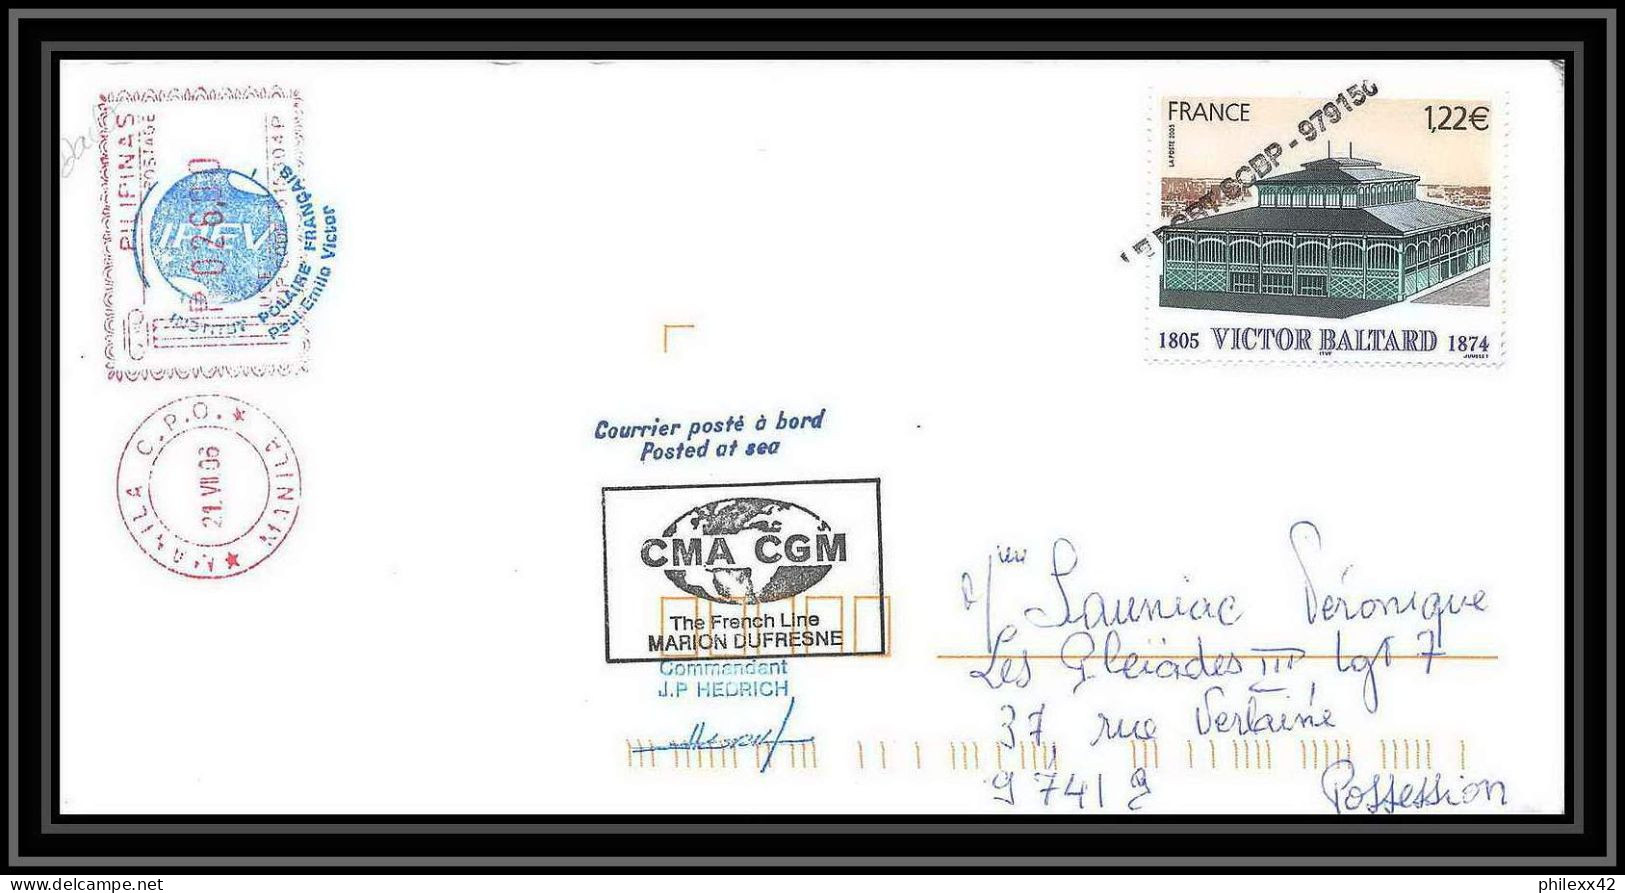 2591 ANTARCTIC Taaf Philippines Pilipinas Mixte Lettre Cover Dufresne 2 Signé Signed Md 155 Marco Polo 2 2006 Papillons - Expéditions Antarctiques